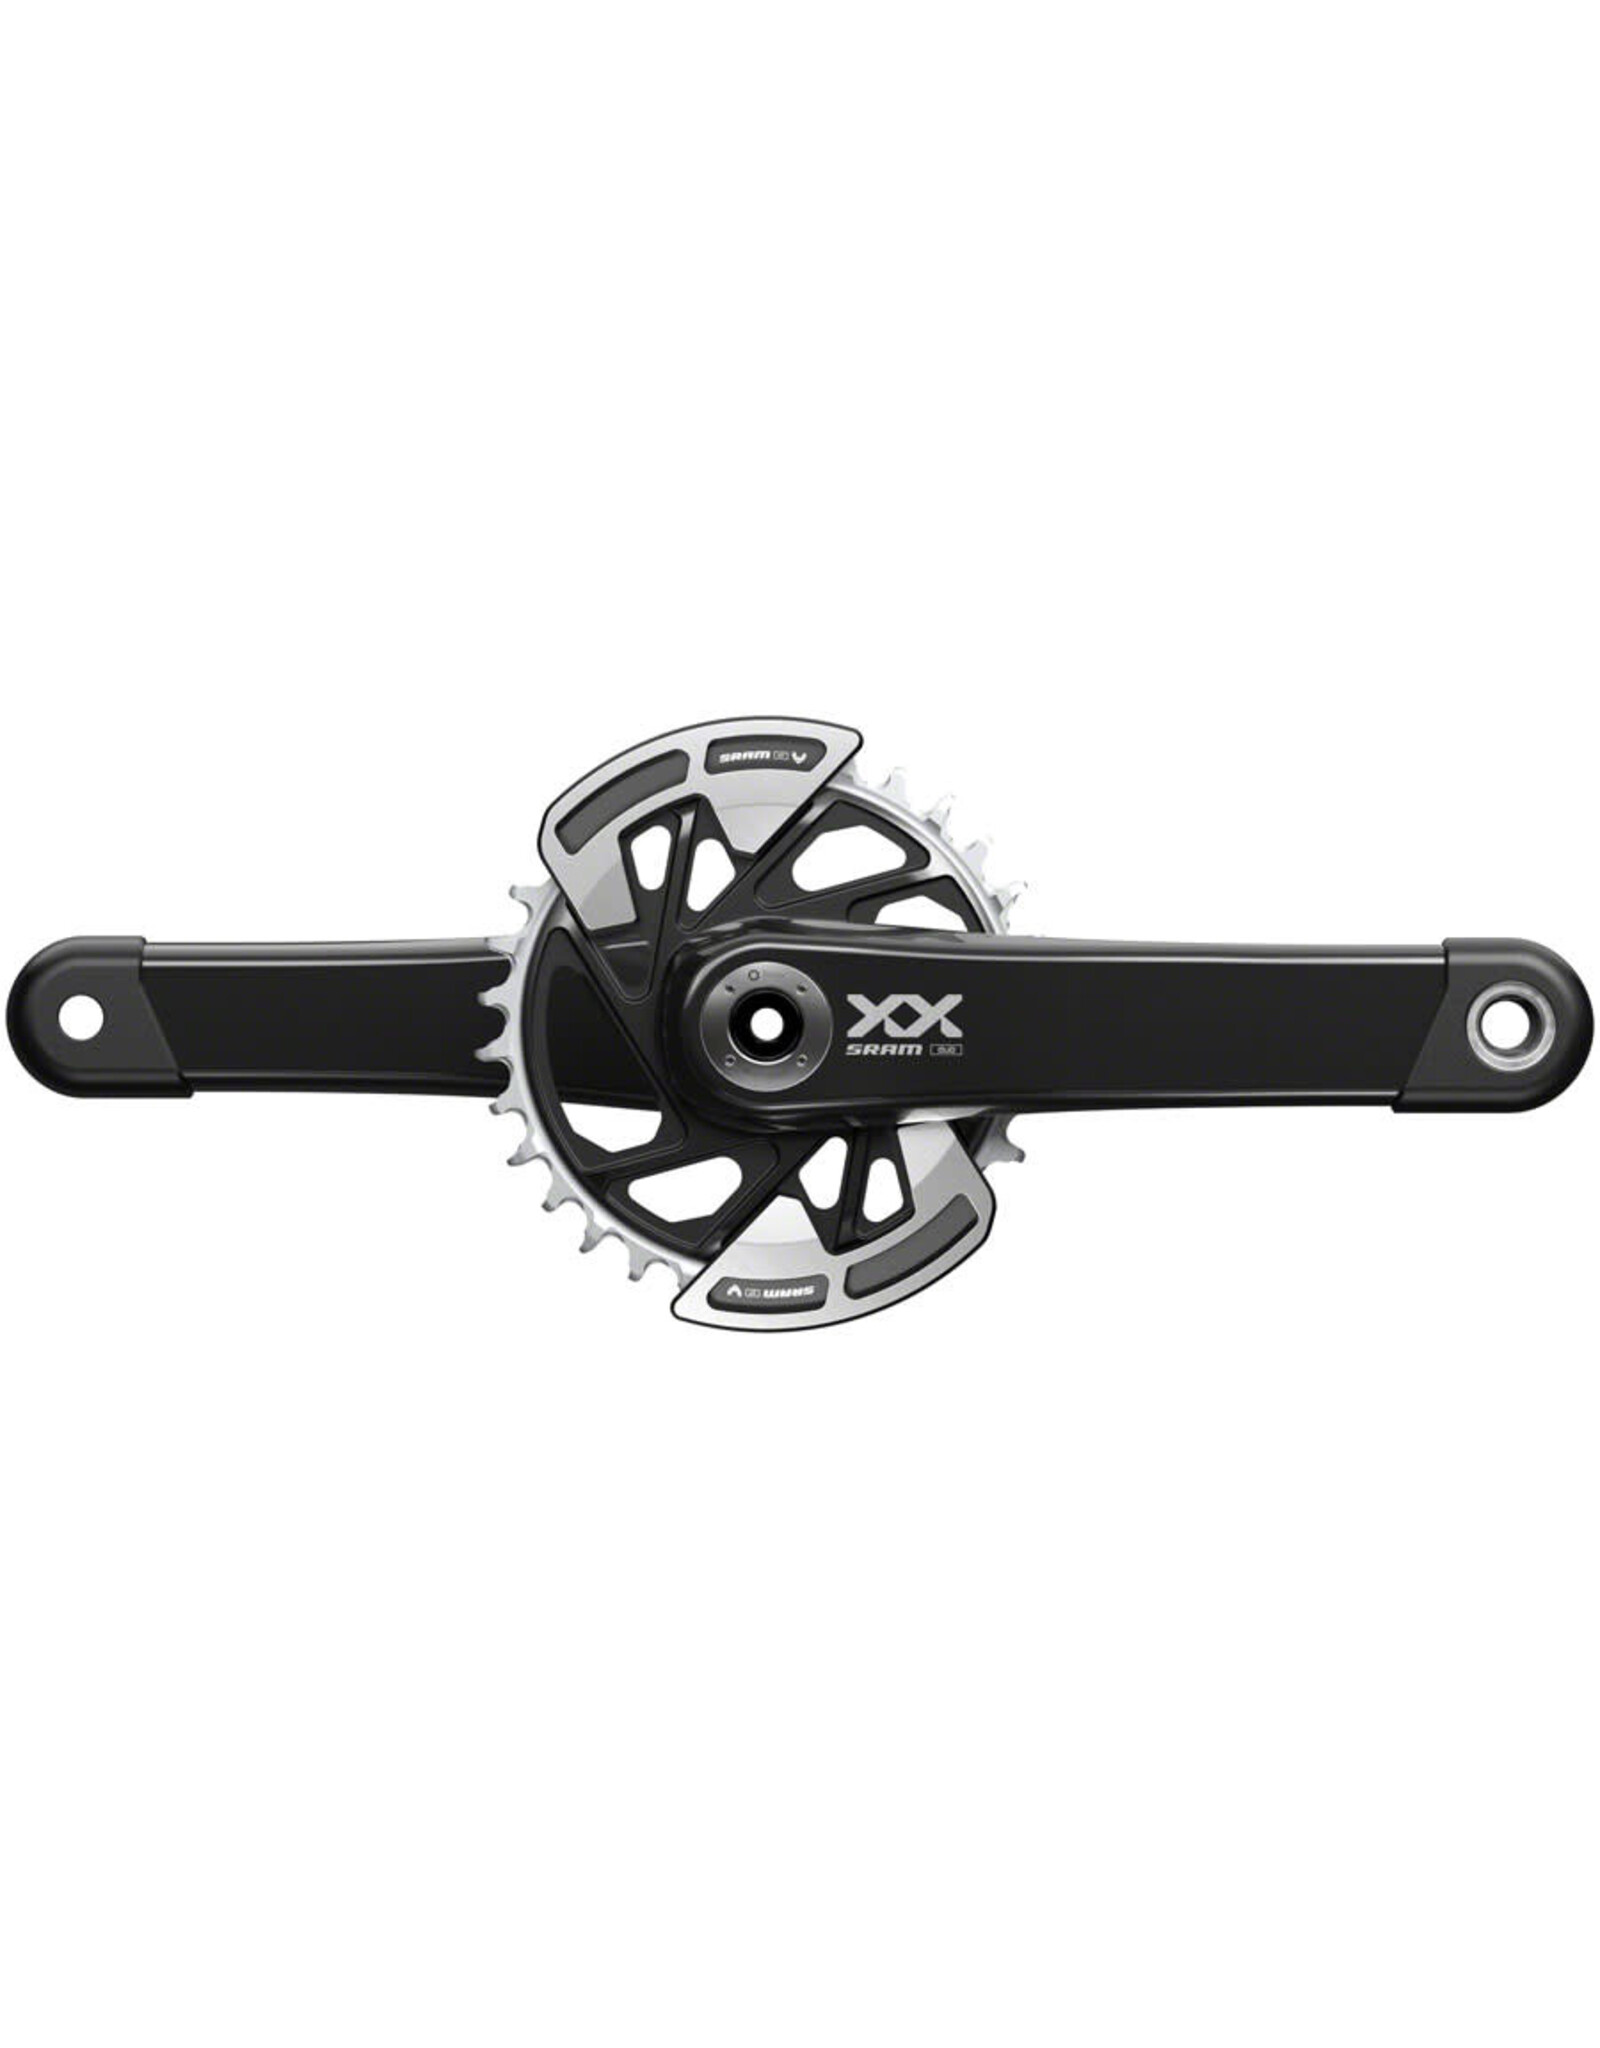 SRAM SRAM XX Eagle T-Type Wide Crankset - 170mm, 12-Speed, 32t Chainring, Direct Mount, 2-Guards, DUB Spindle Interface, Black